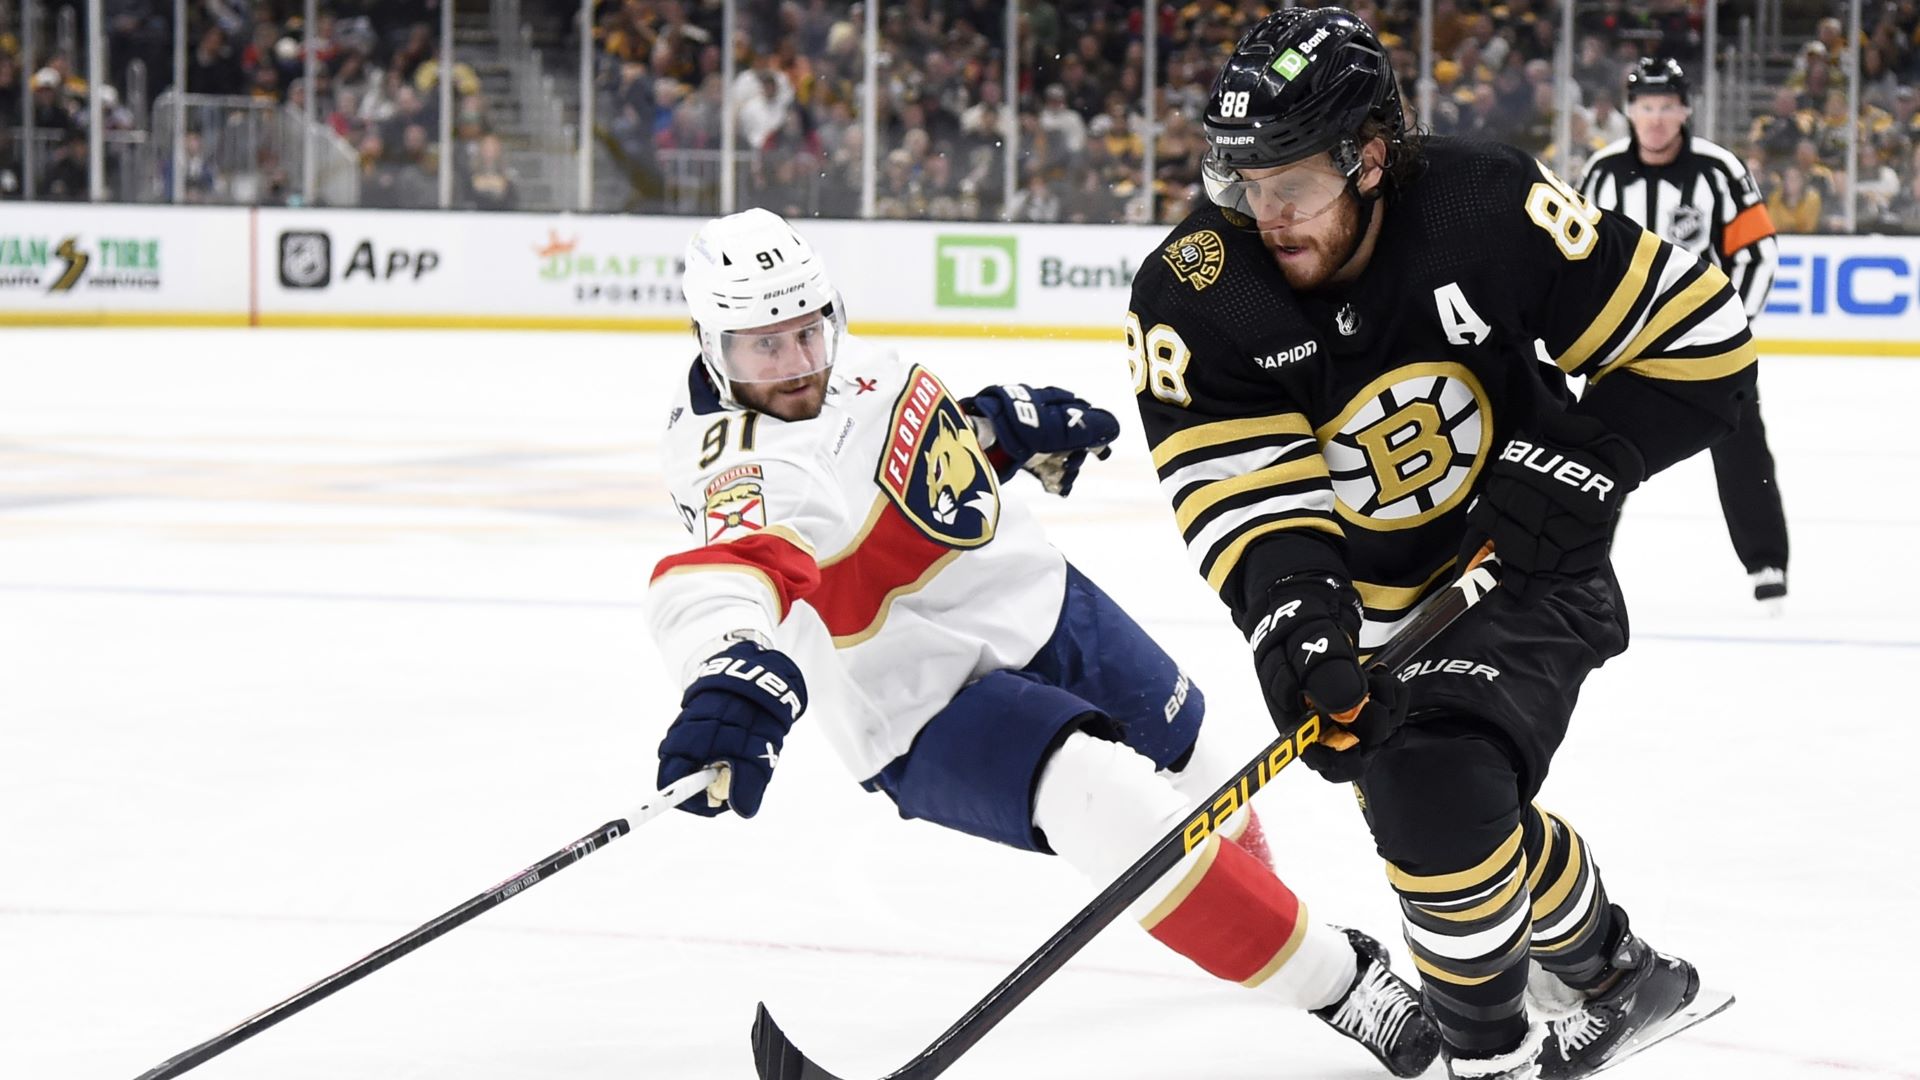 Bruins-Panthers Game 1: Projected Lines, Defensive Pairings For Series
Opener